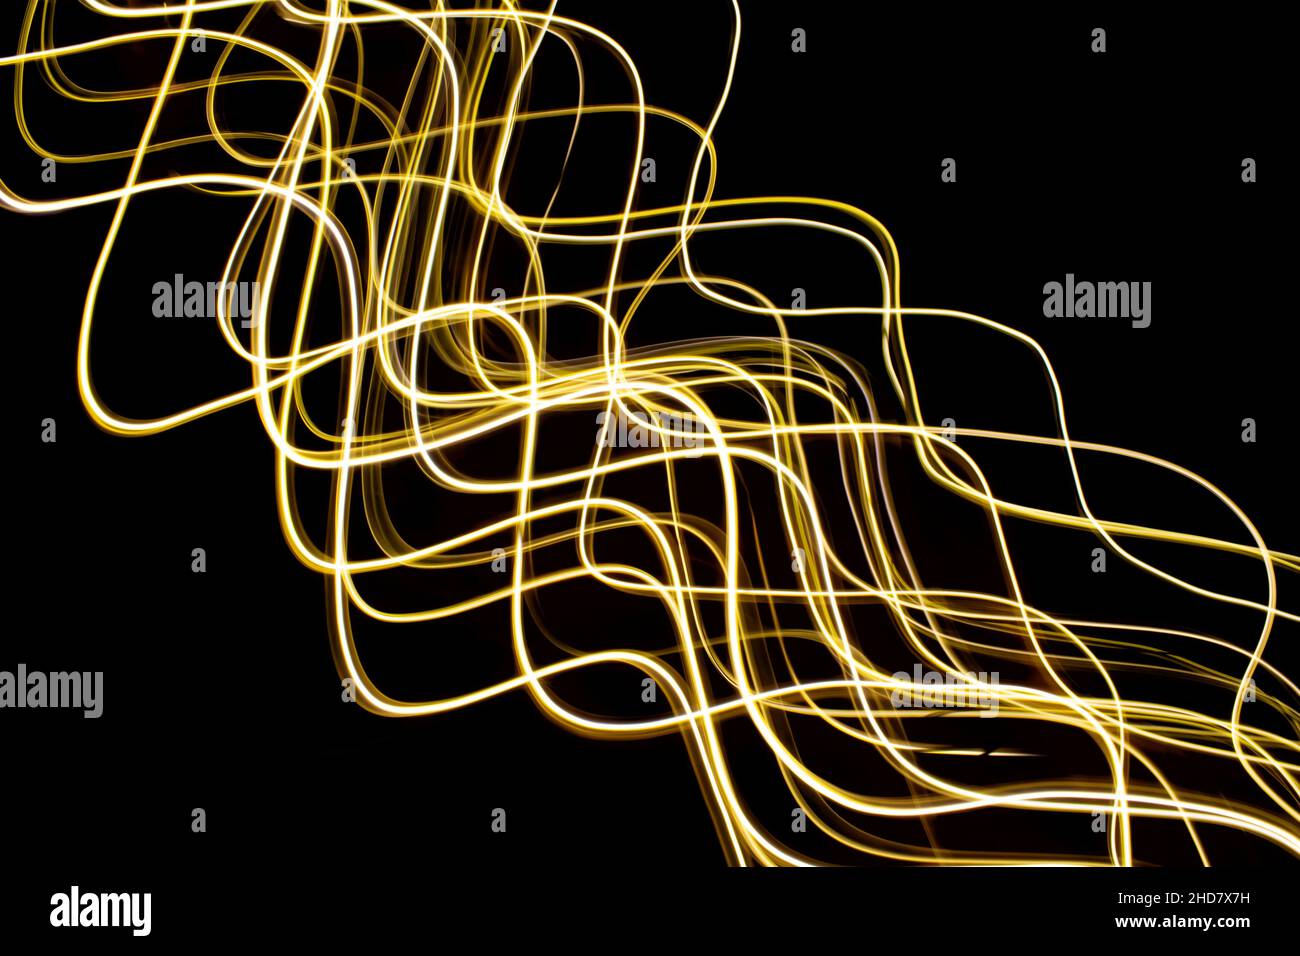 Abstract golden swirl against black background, light painting yellow swirl. Long exposure photography. Stock Photo